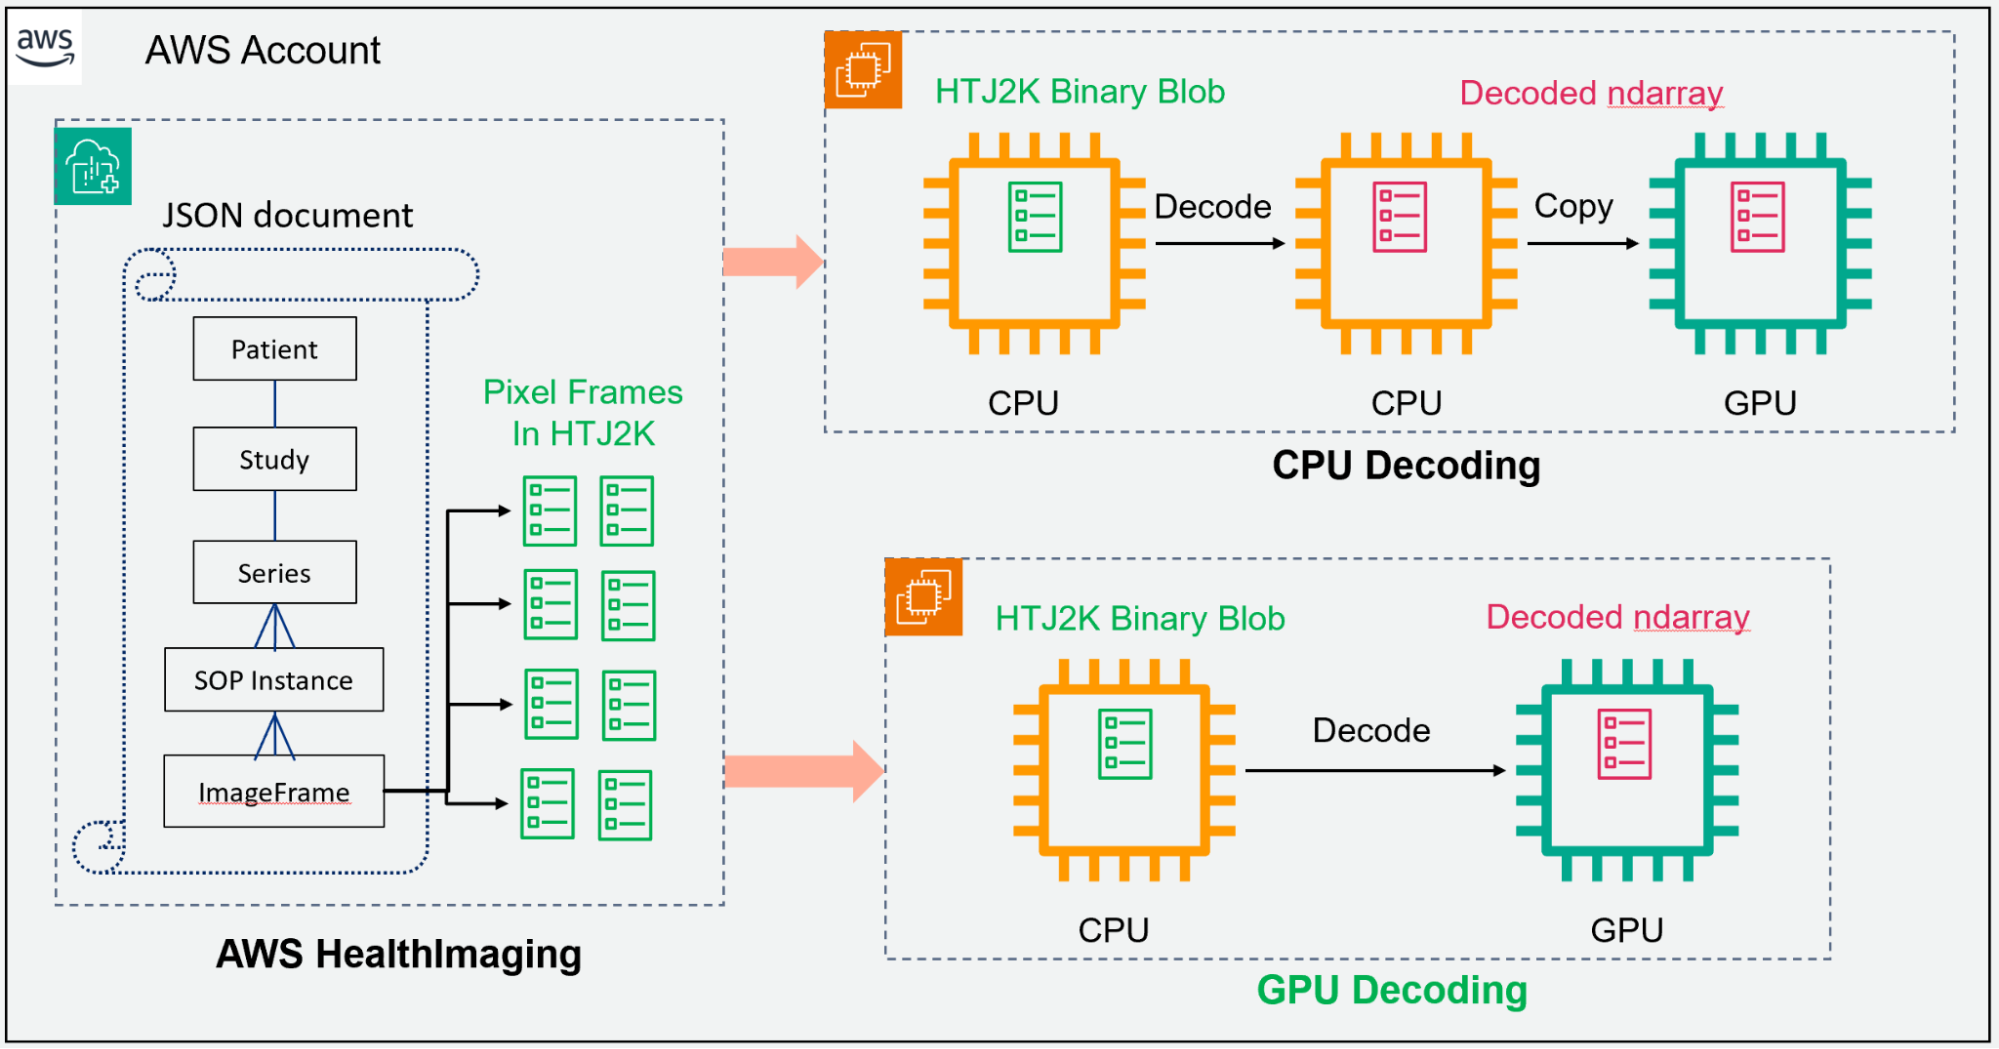 The AWS HealthImaging API architecture, from JSON document to CPU and GPU decoding.
